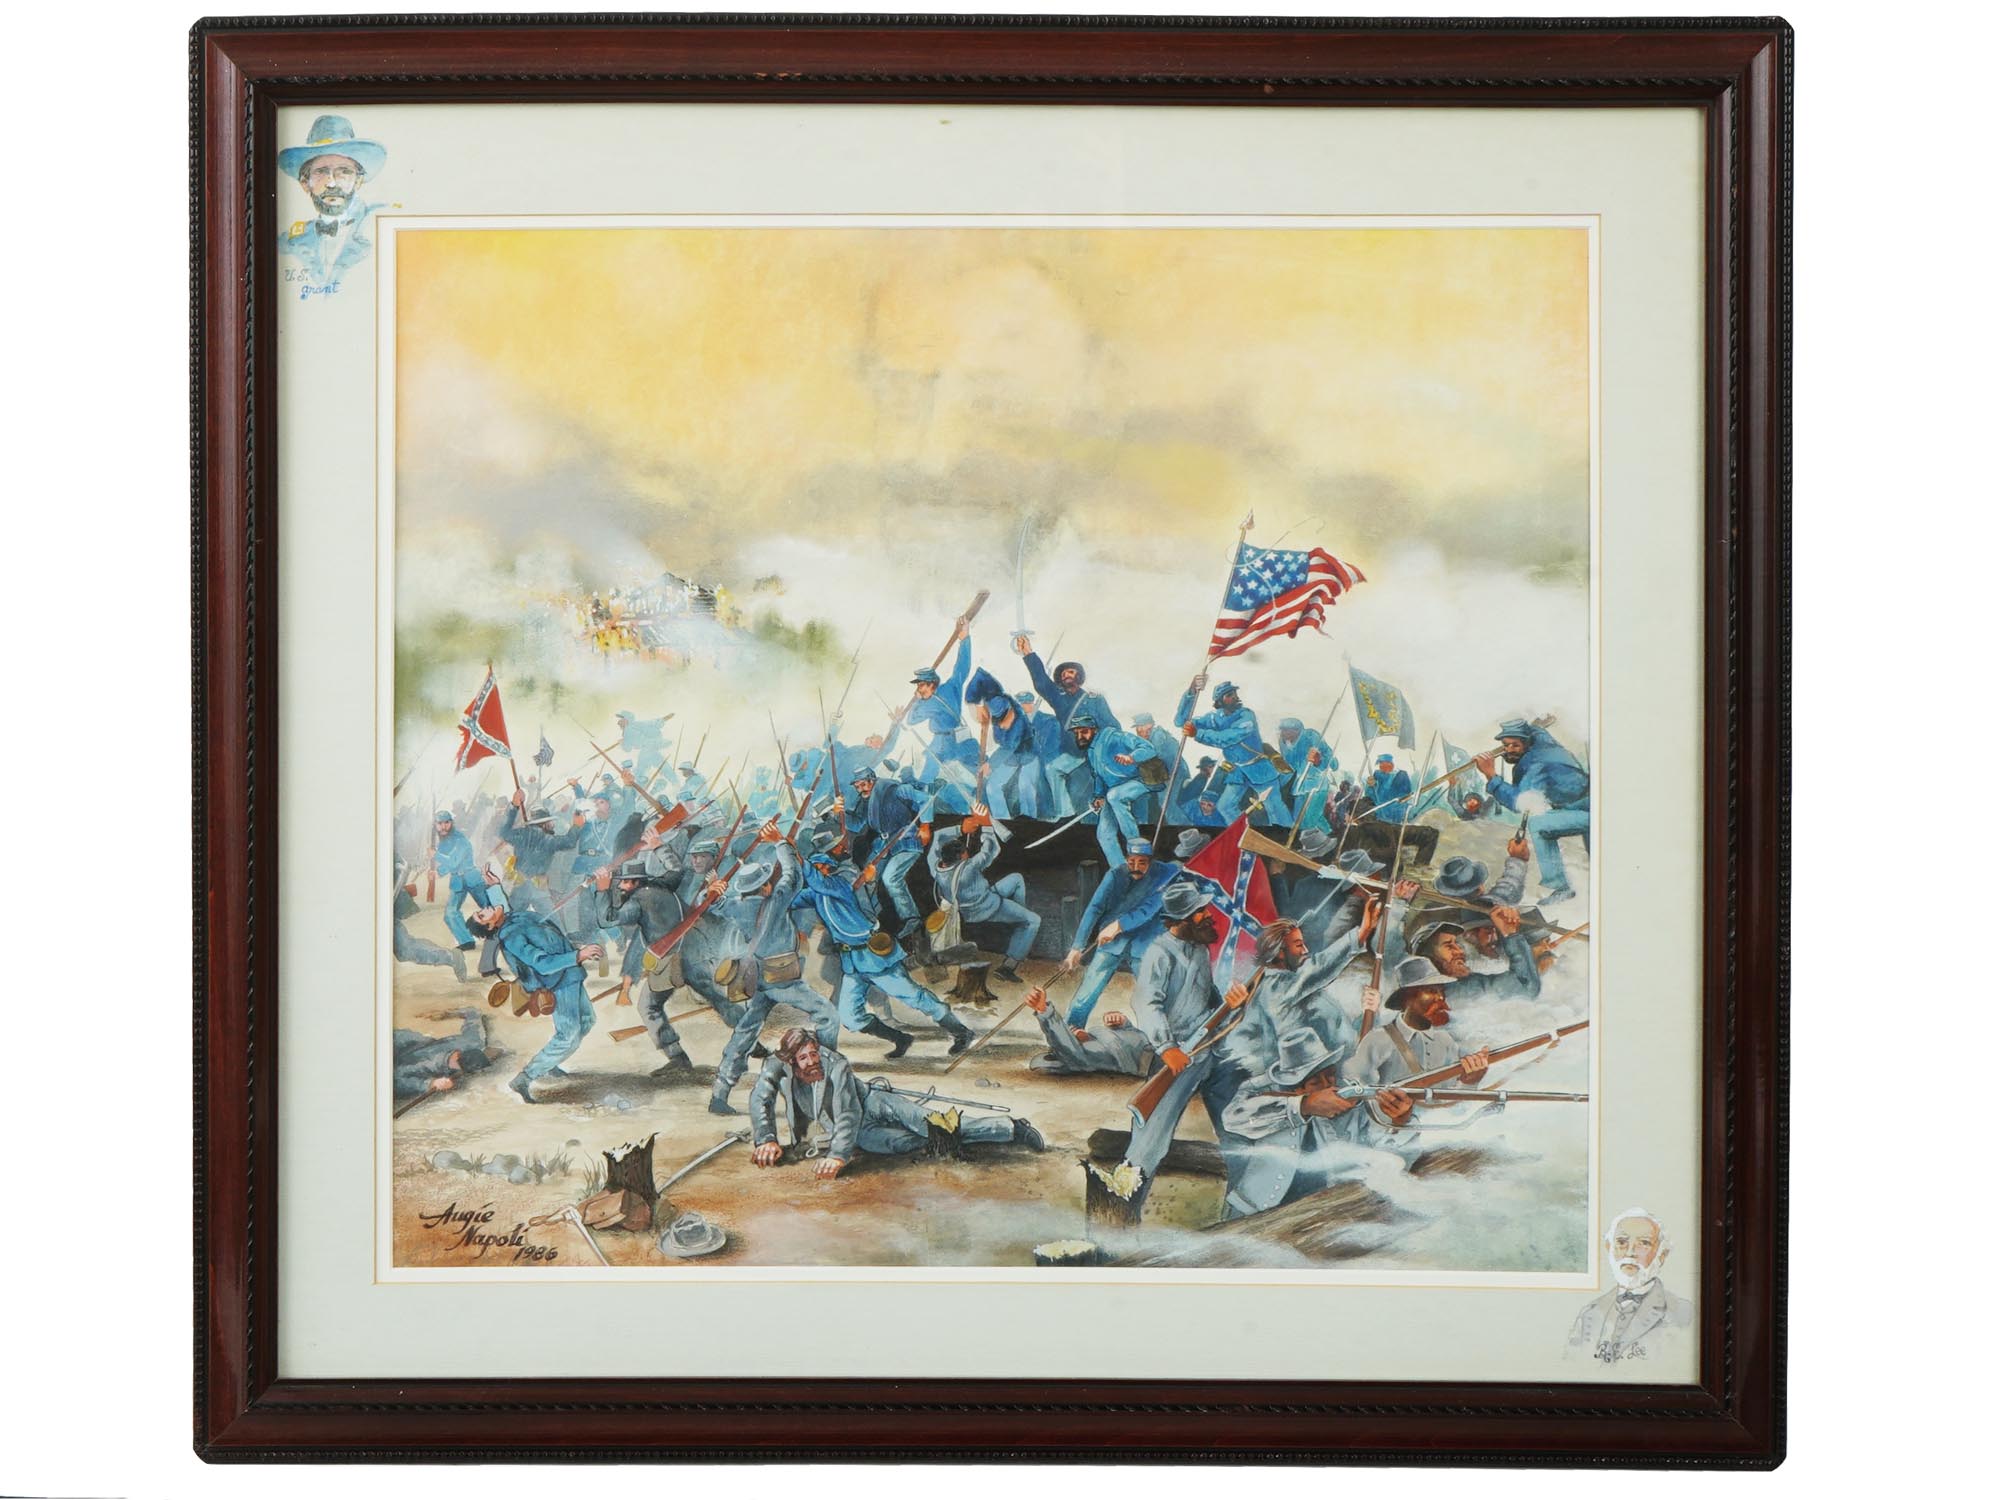 AMERICAN PAINTING BY AUGIE NAPOLI CIVIL WAR 1986 PIC-0